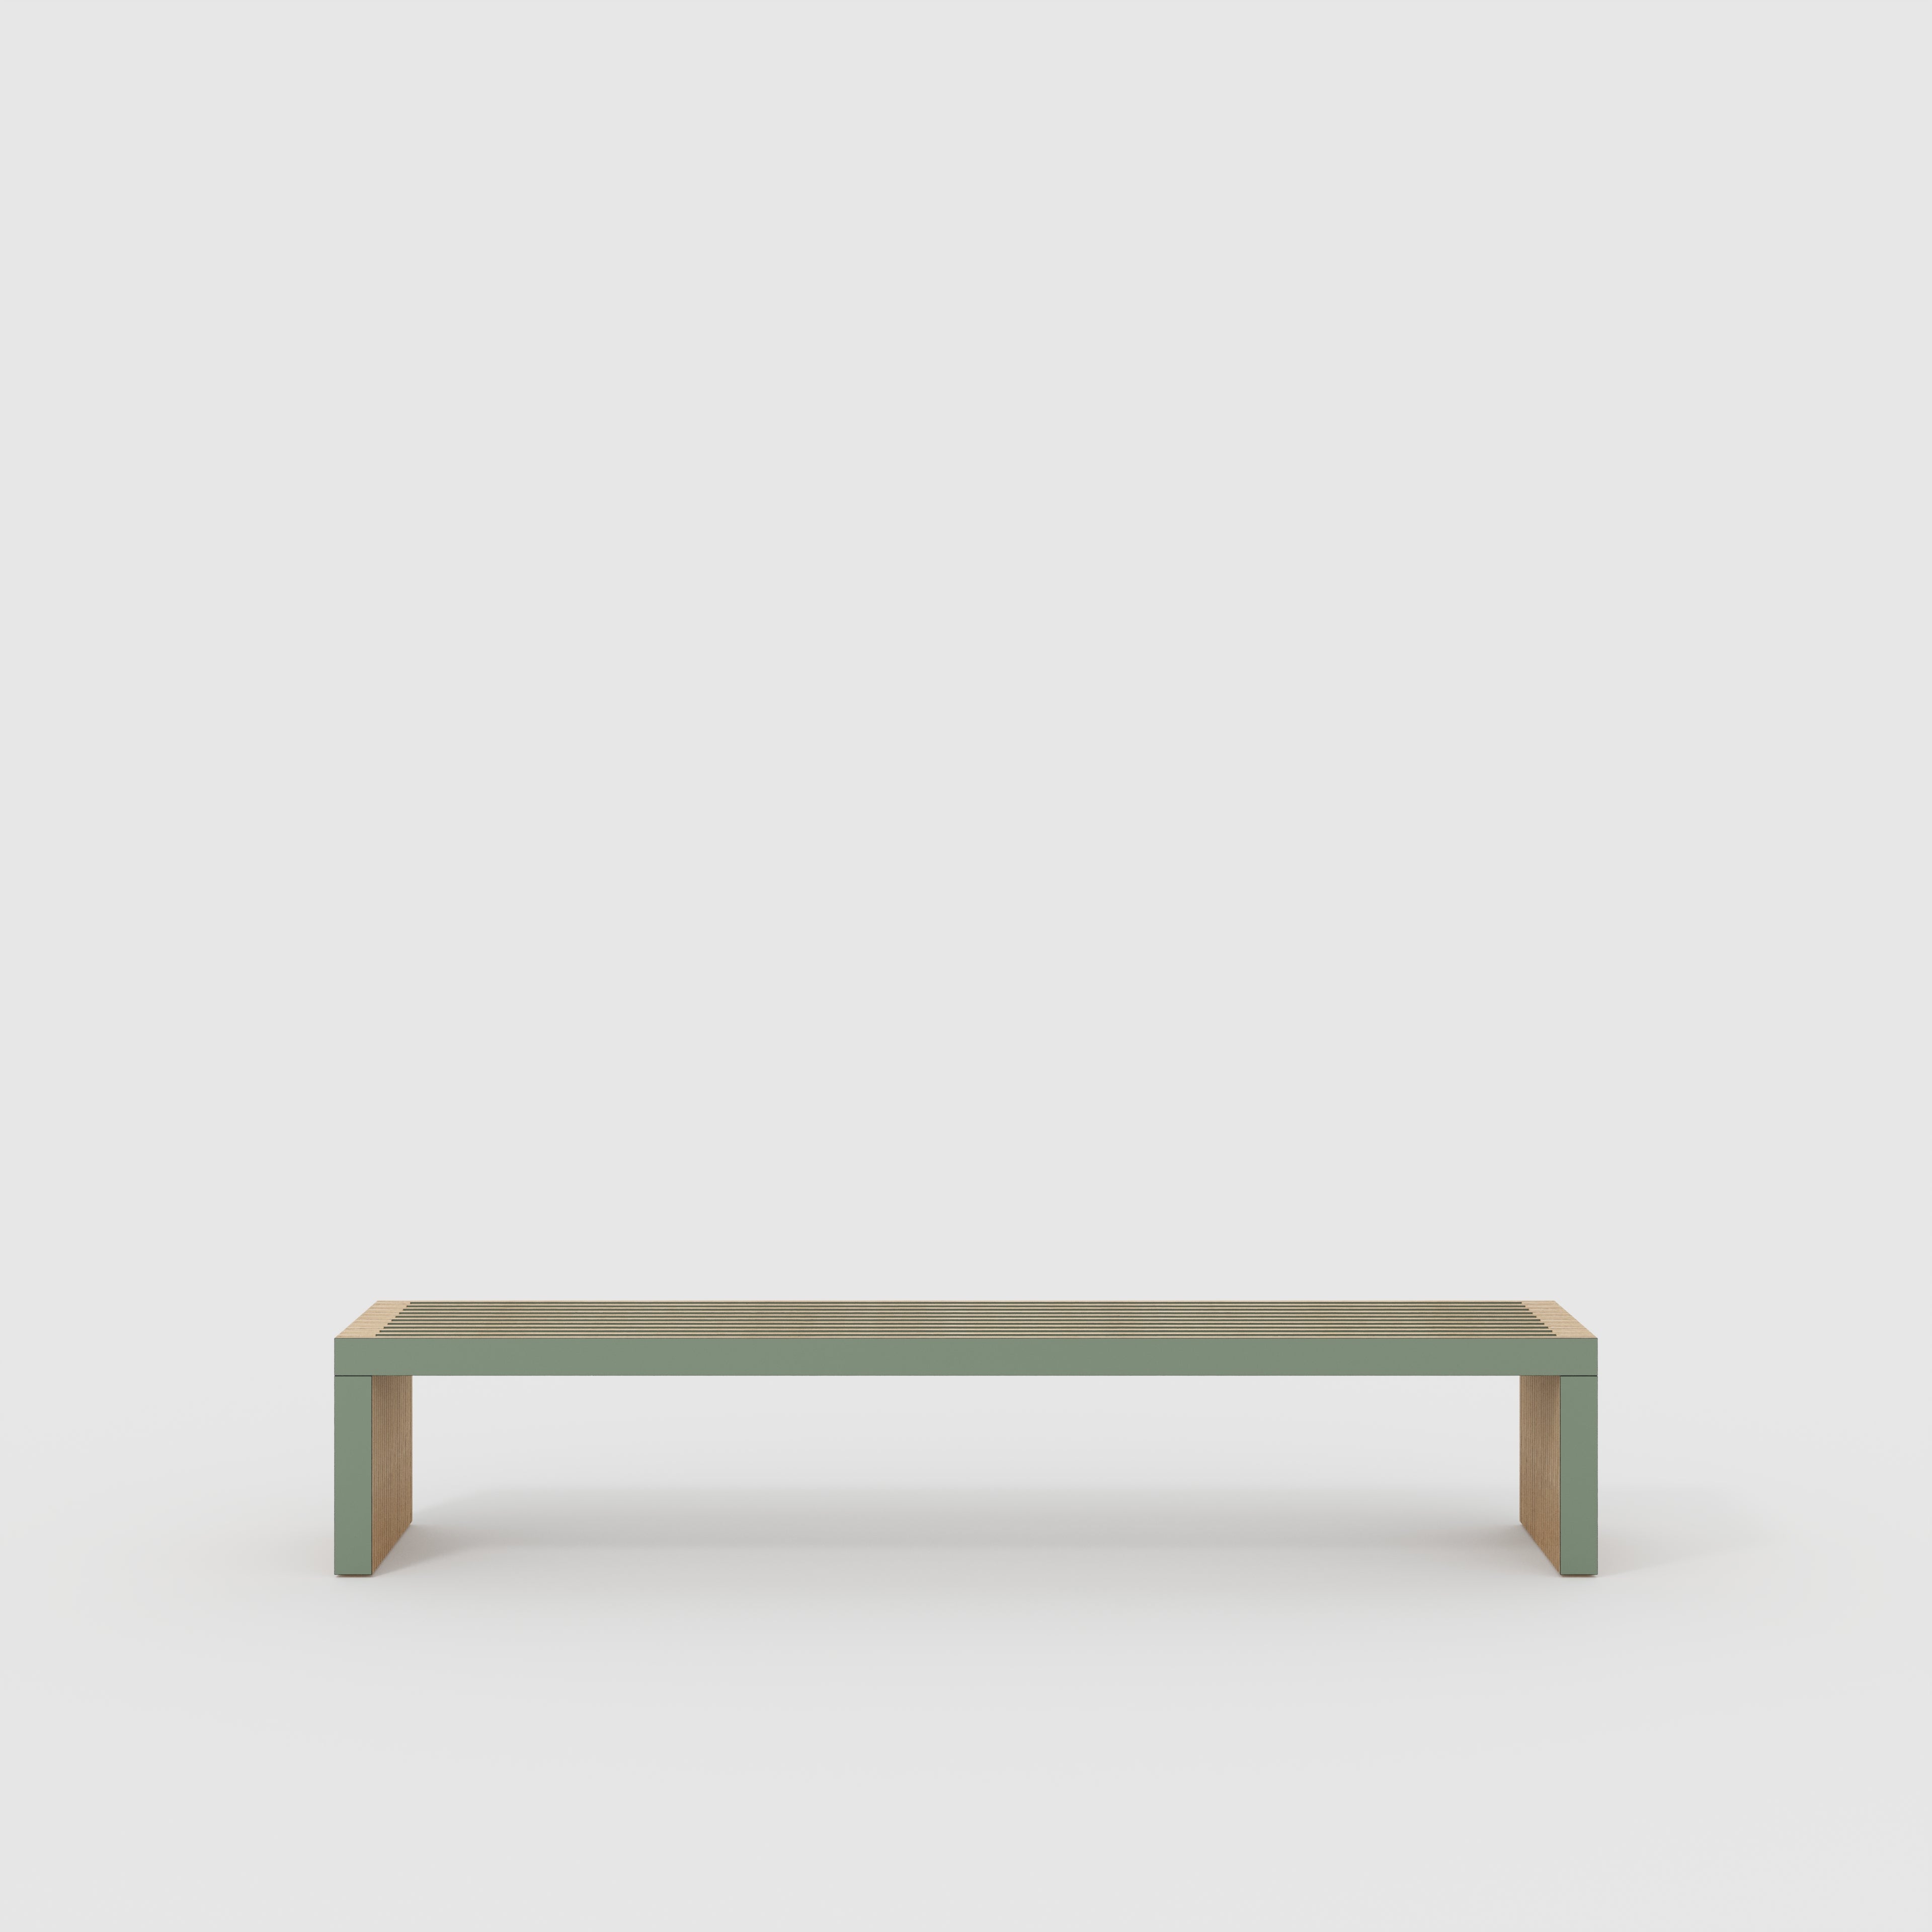 Bench Seat with Slats - Formica Green Slate - 2400(w) x 410(d) x 450(h)